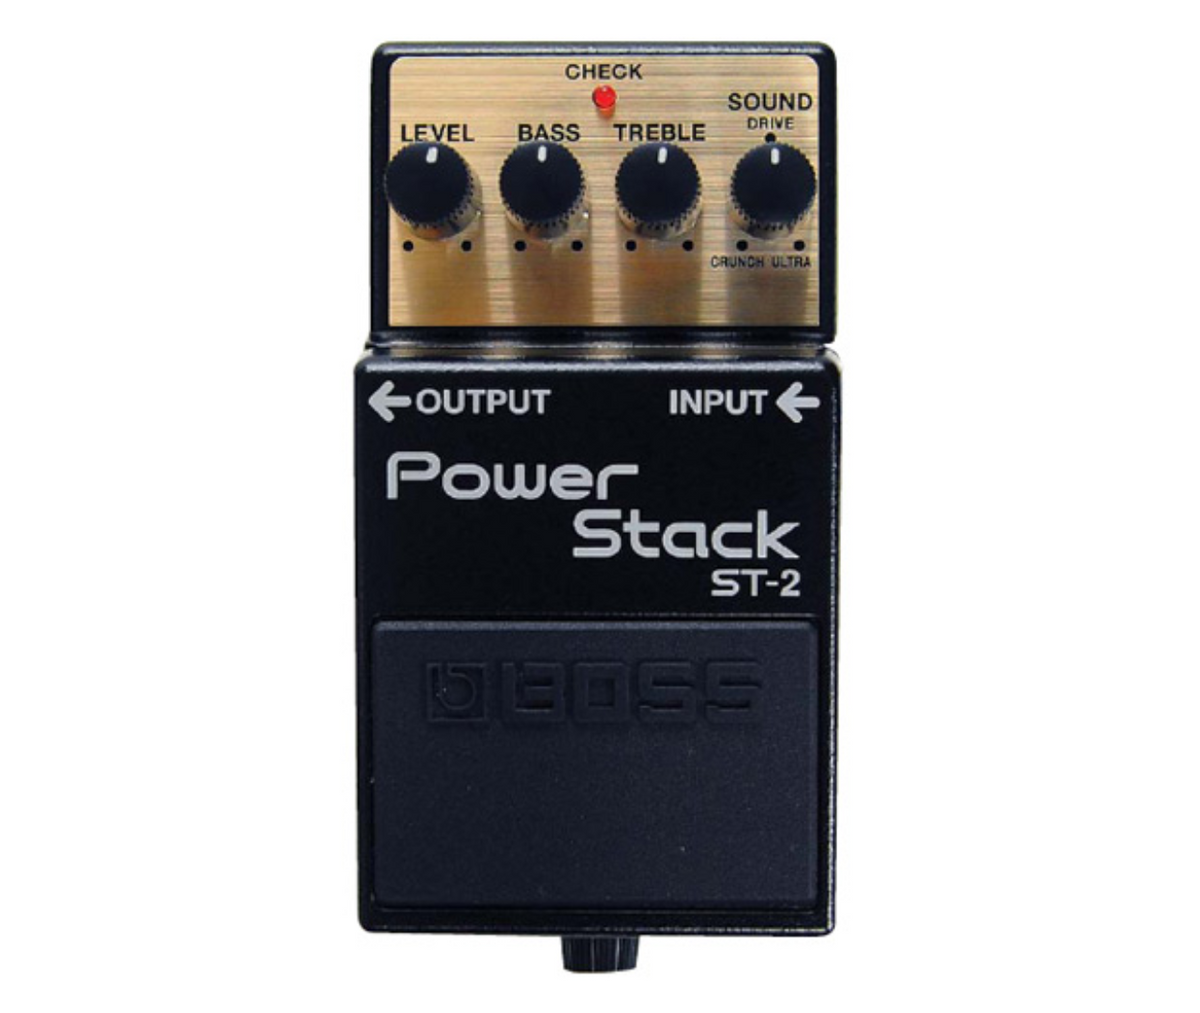 BOSS ST-2 Power Stack Best Guitar Effects Pedal 2-band EQ with Dedicated Bass and Treble Knob, Vintage Crunch to Ultra High-gain Modern Distortion